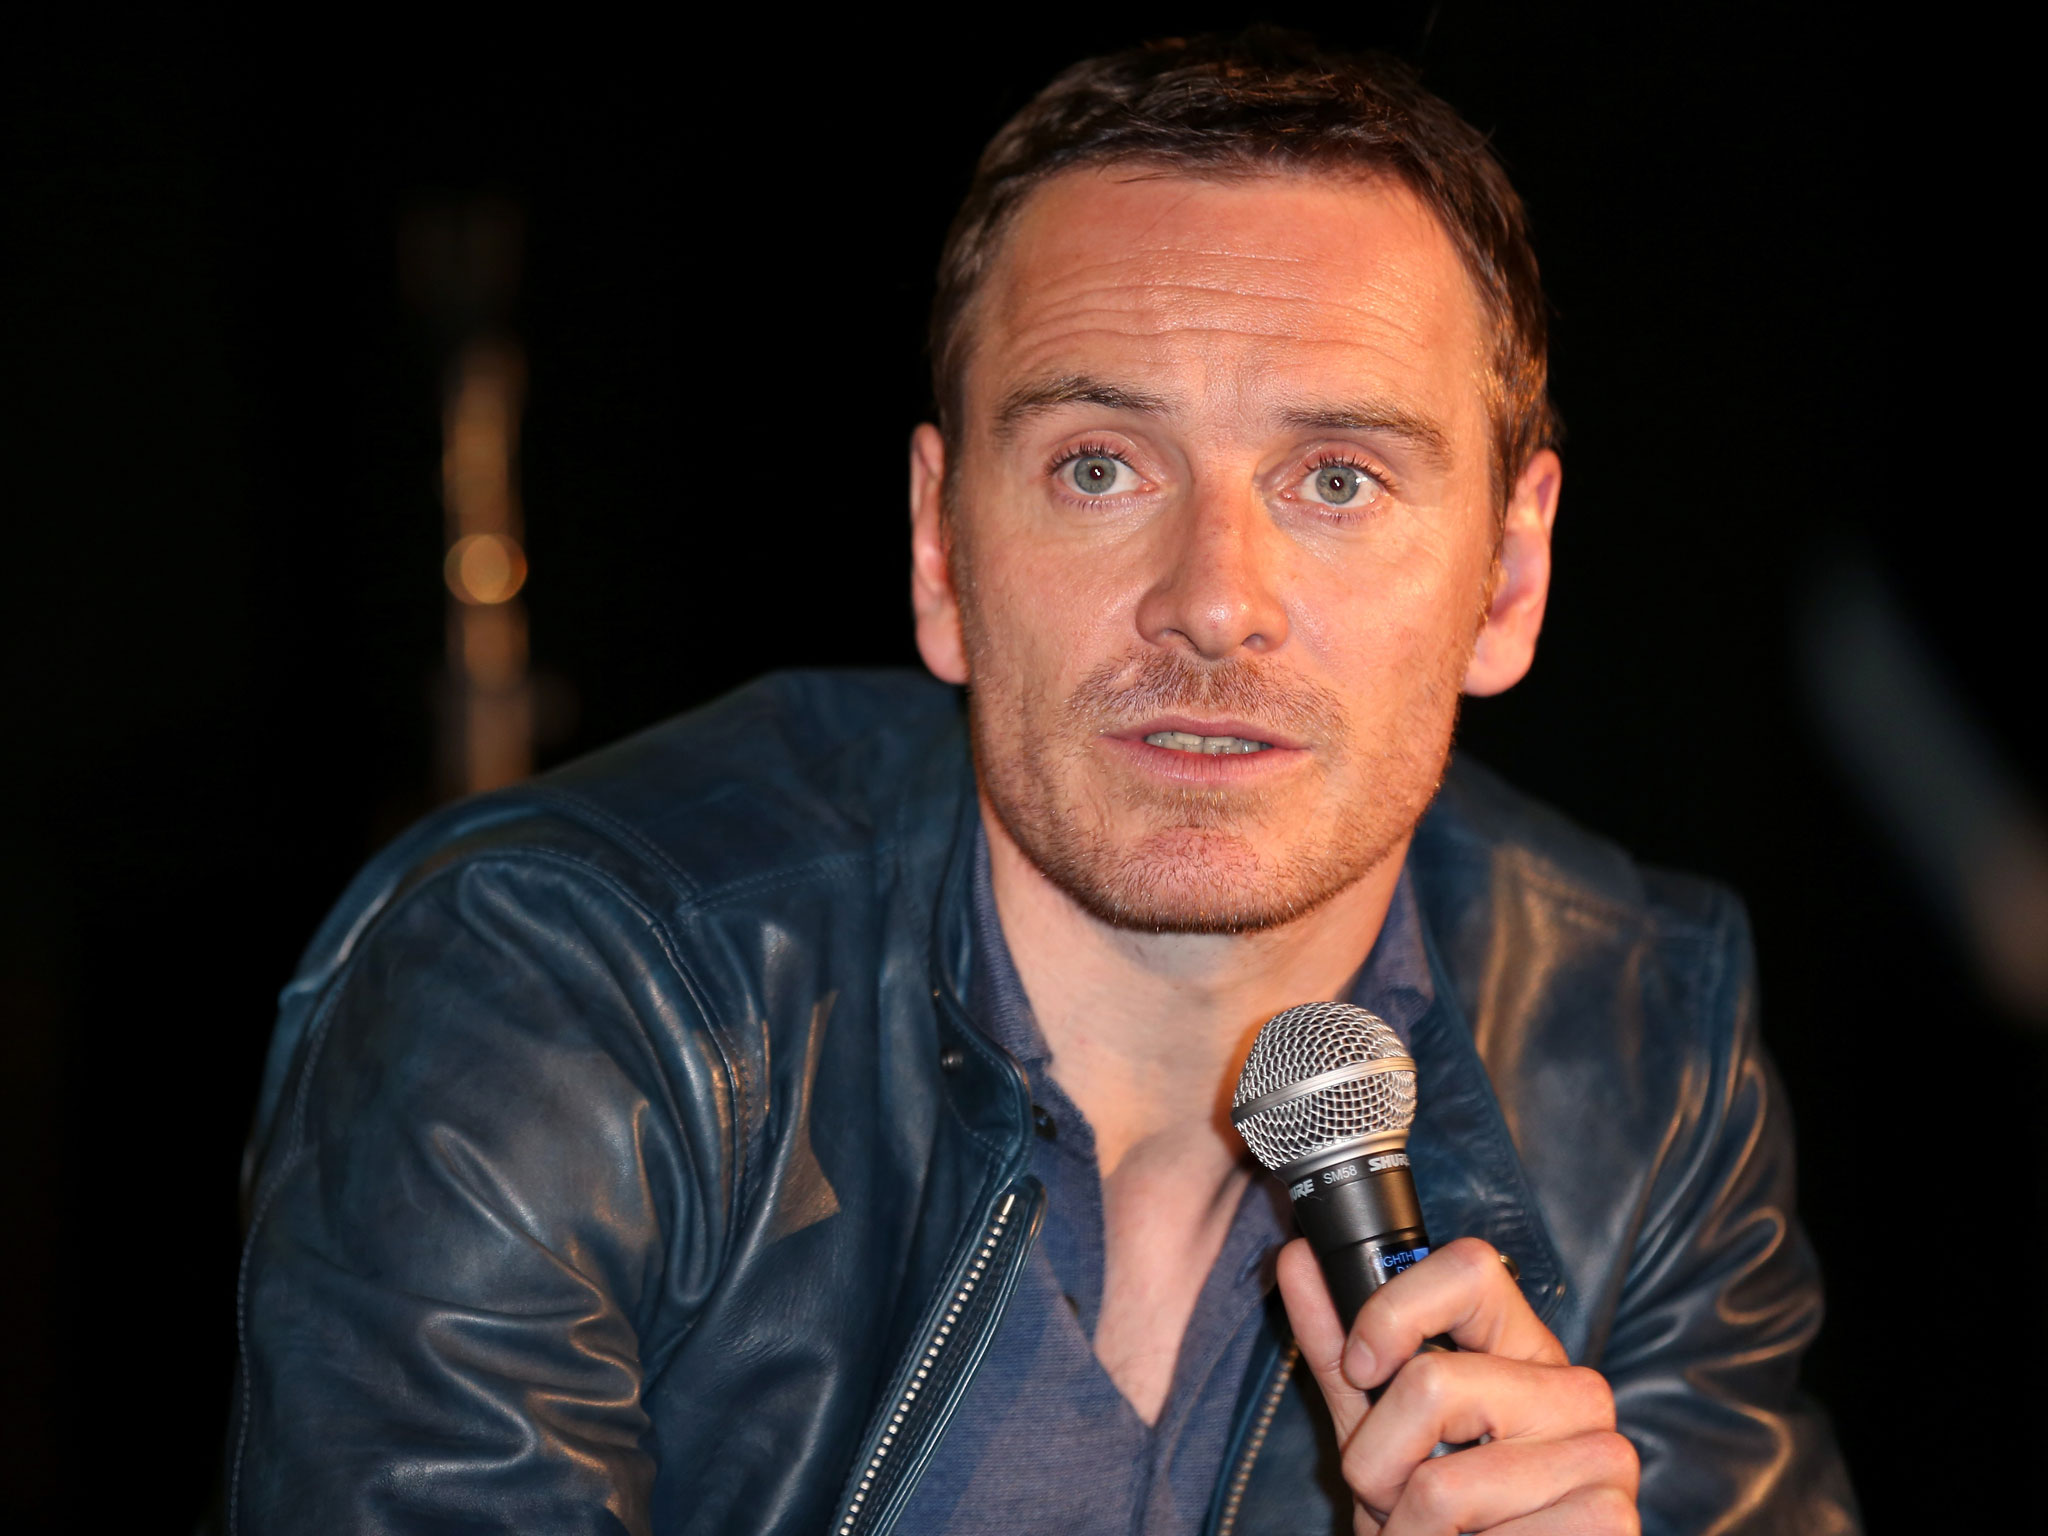 Michael Fassbender embarrassingly dismissed in Sony cyber hack: 'I don't know who he is and the rest of the world won't care' - People - News - The ...